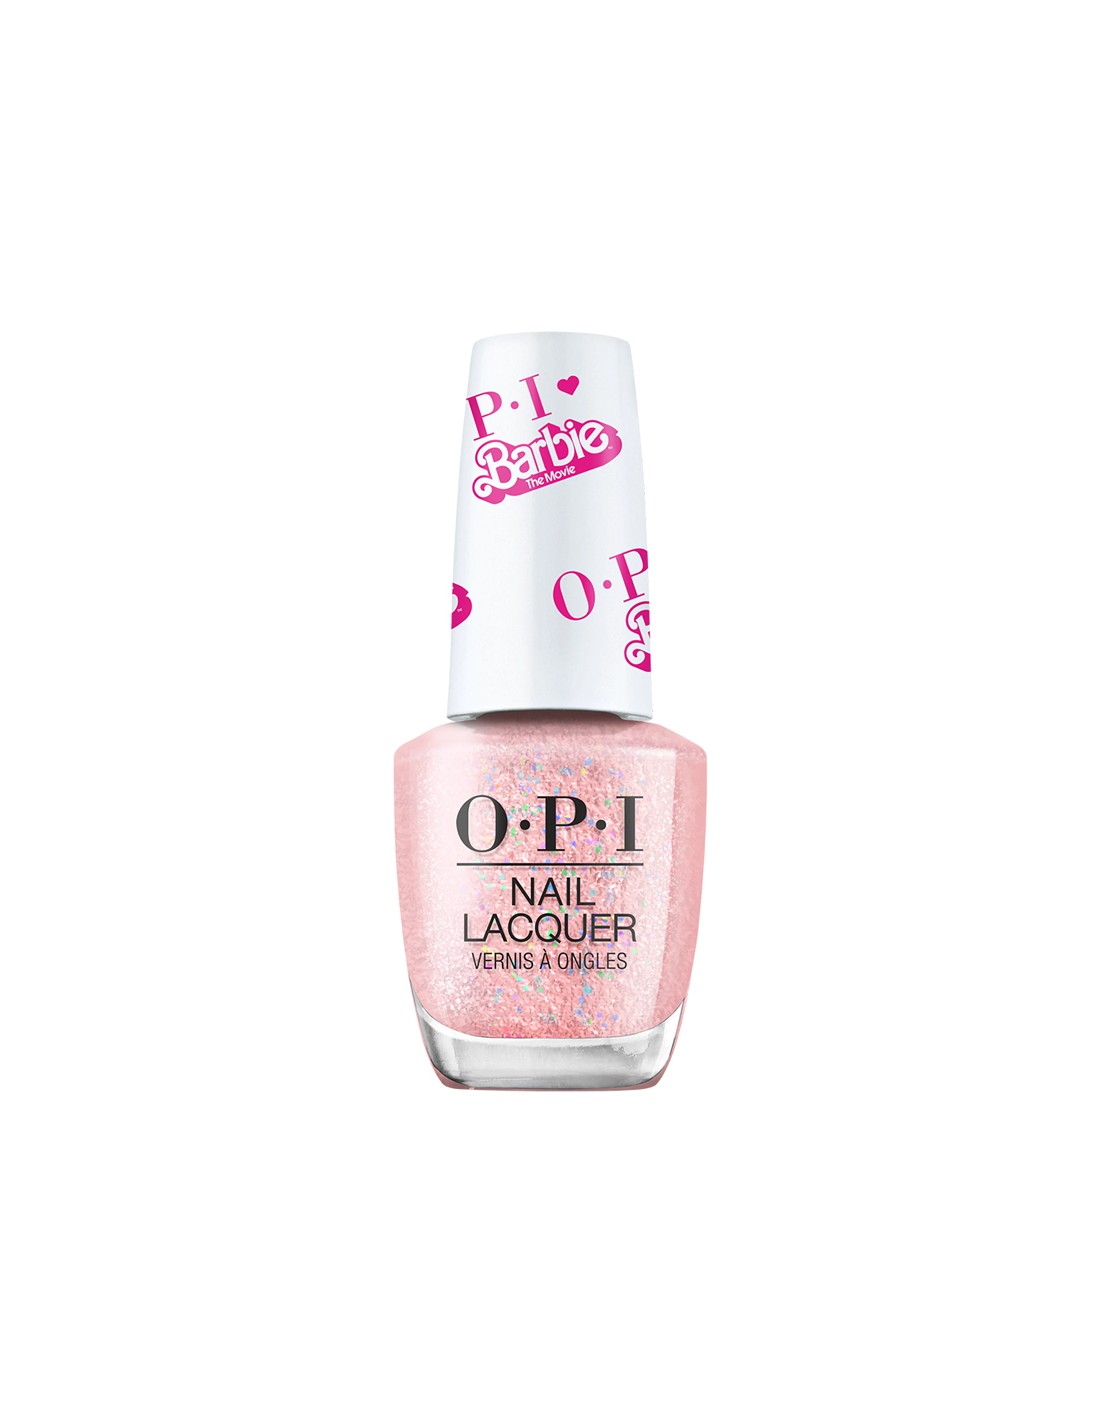 Amazon.com: OPI Nail Lacquer, CIA = Color is Awesome, Blue Nail Polish,  Washington DC Collection, 0.5 fl oz : Beauty & Personal Care